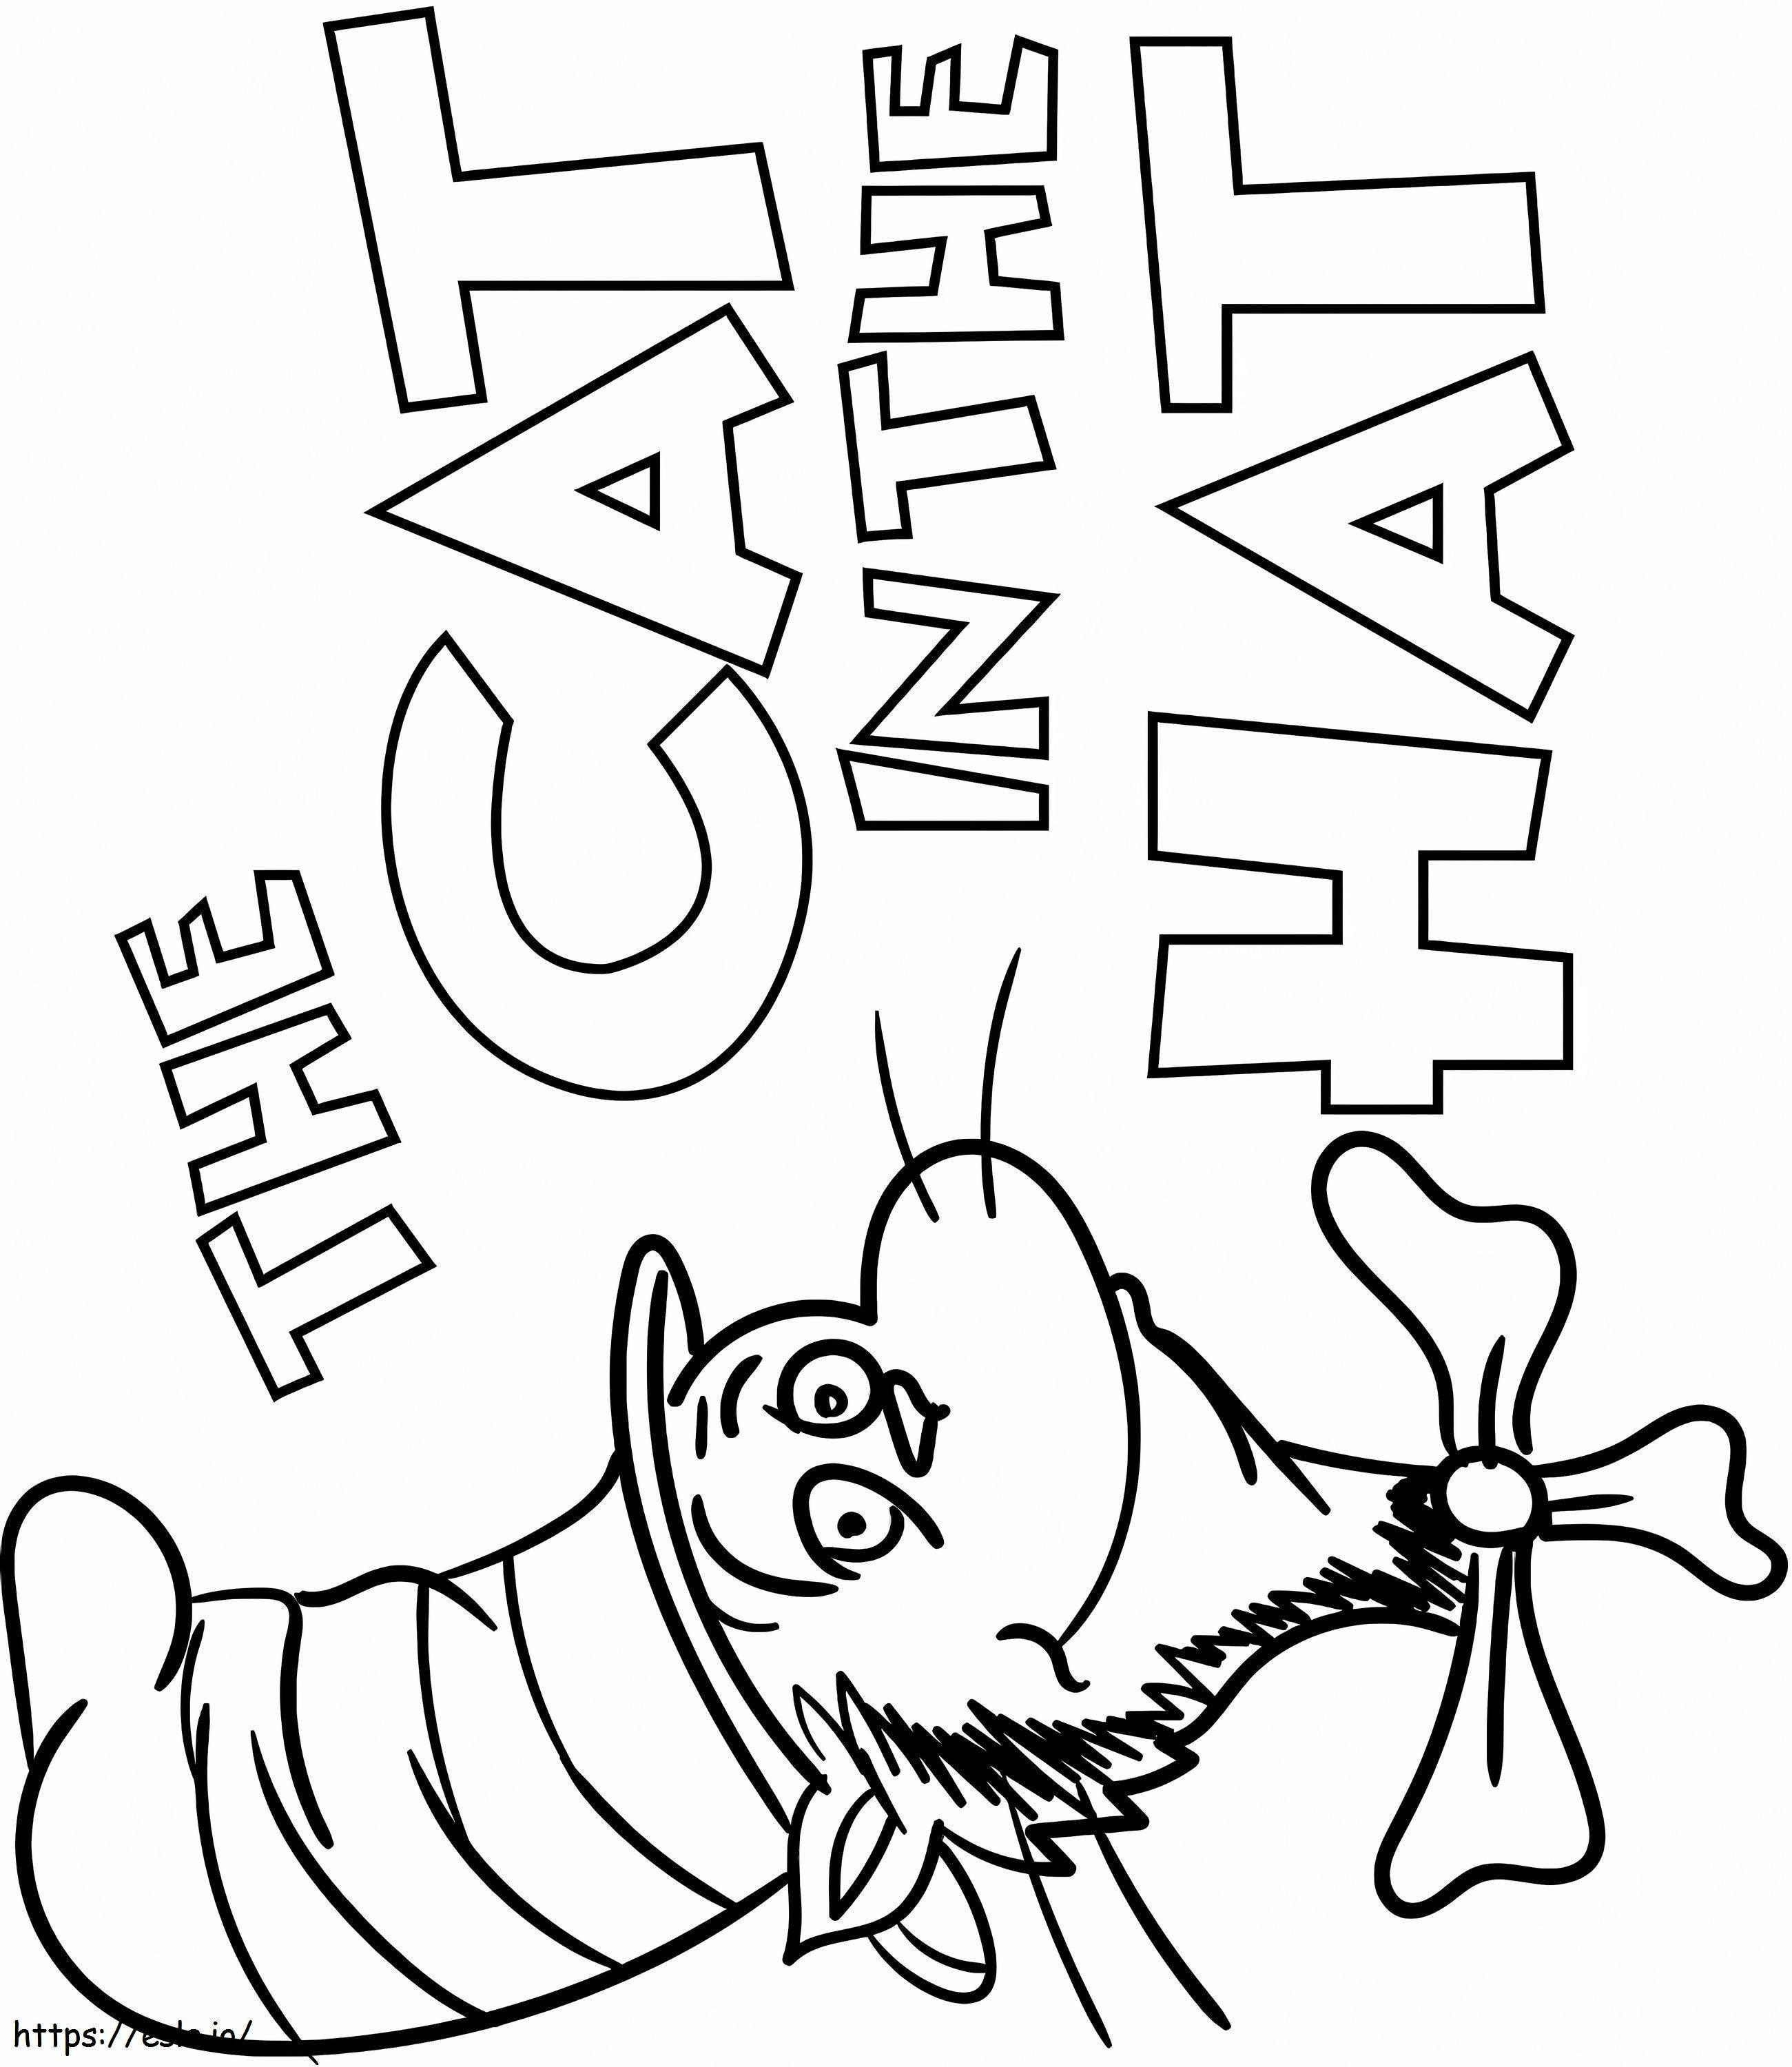 1567860746 The Cat In The Hat A4 coloring page